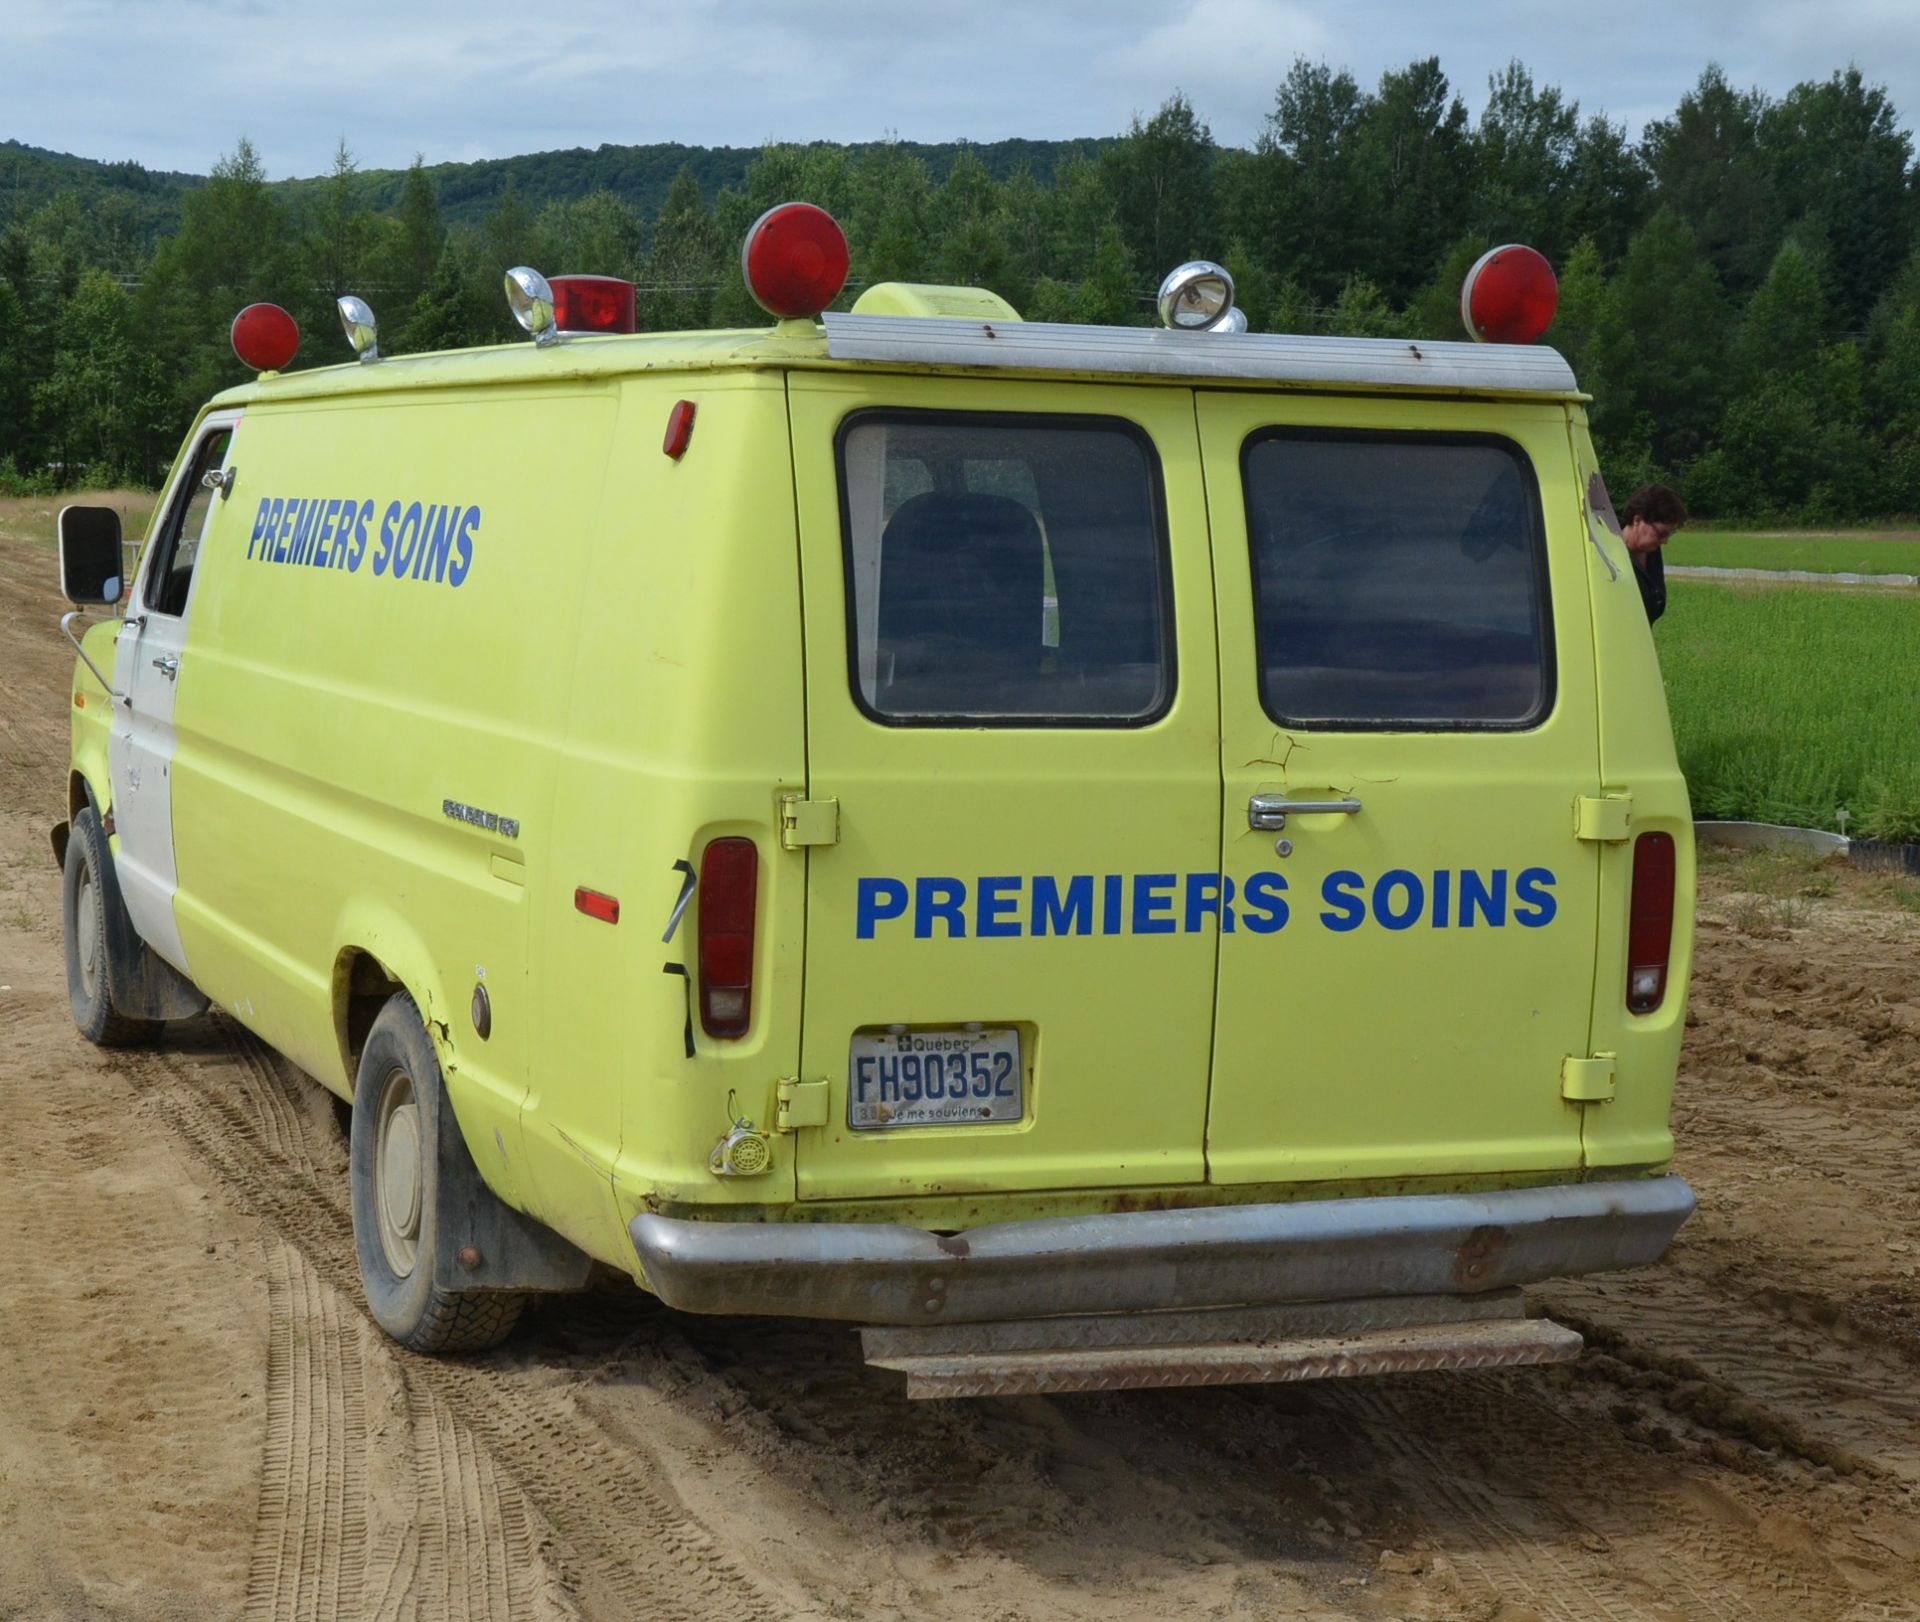 FORD (1979) E 150 VAN WITH GAS ENGINE, AUTOMATIC TRANSMISSION, REAR WHEEL DRIVE, WORKING AMBULANCE - Image 3 of 7